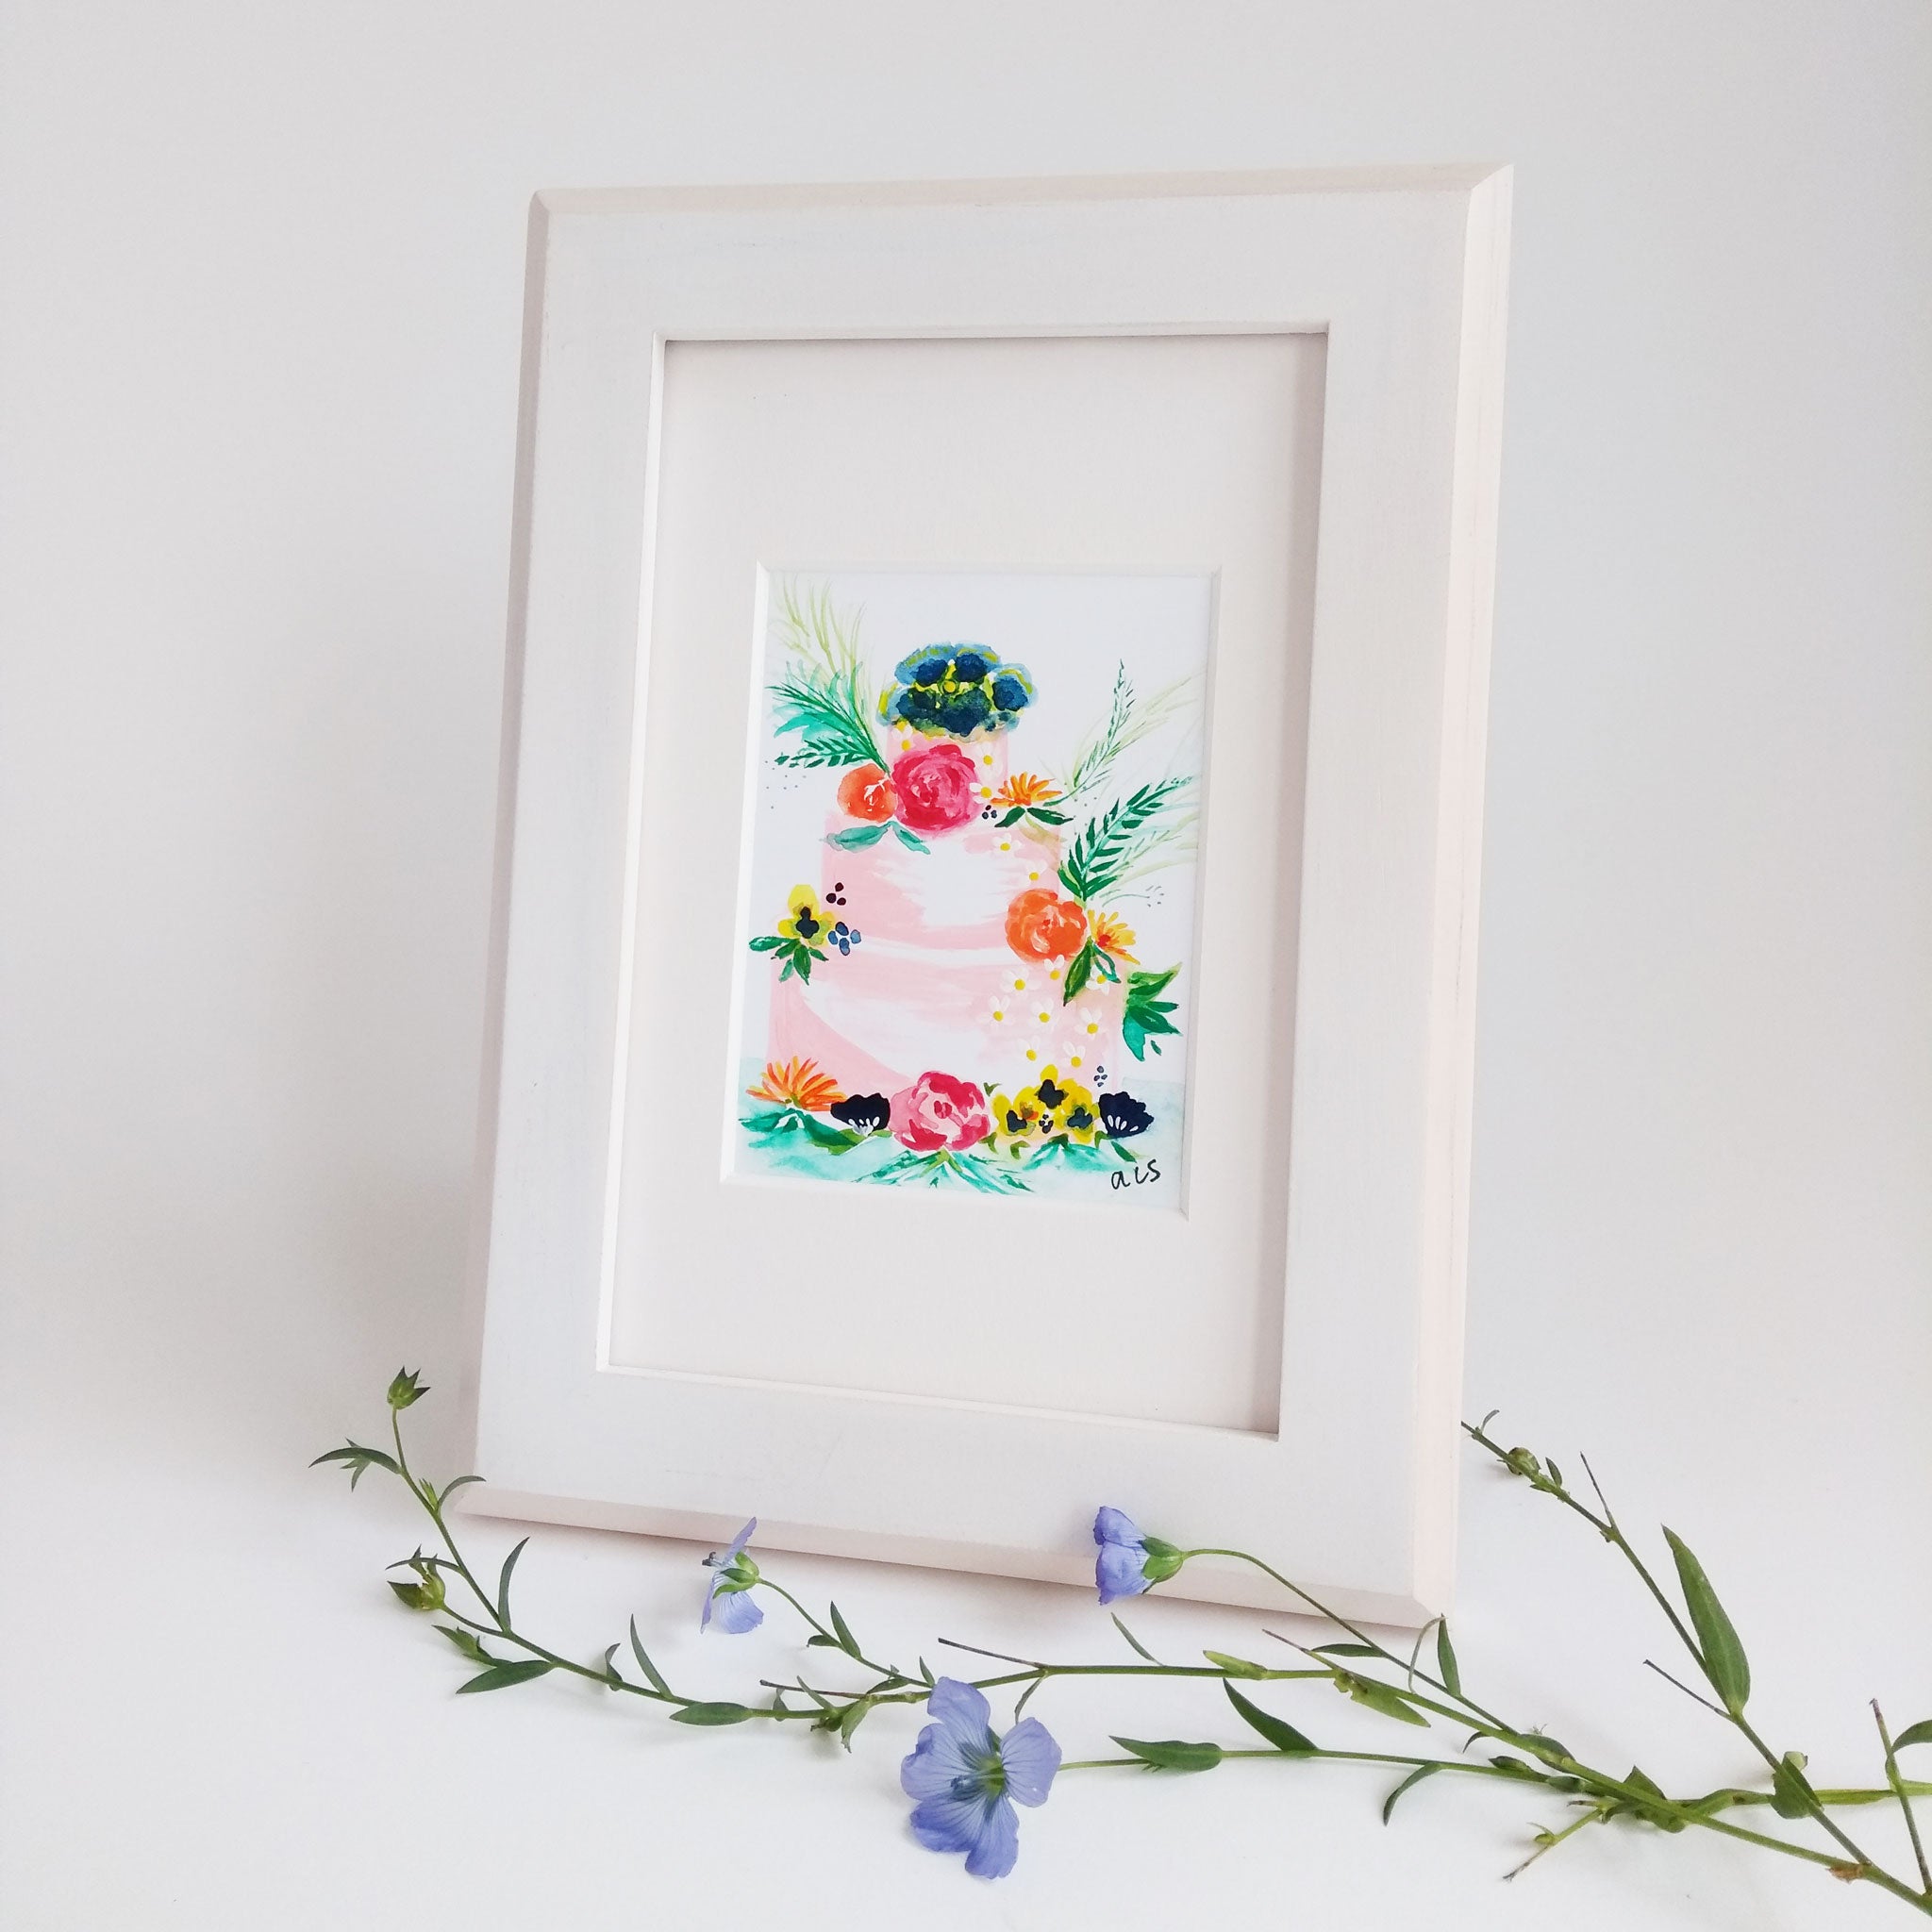 Five Patch Design Pretty in Pink Framed Botanical Cake Painting shown with stem and purple flowers